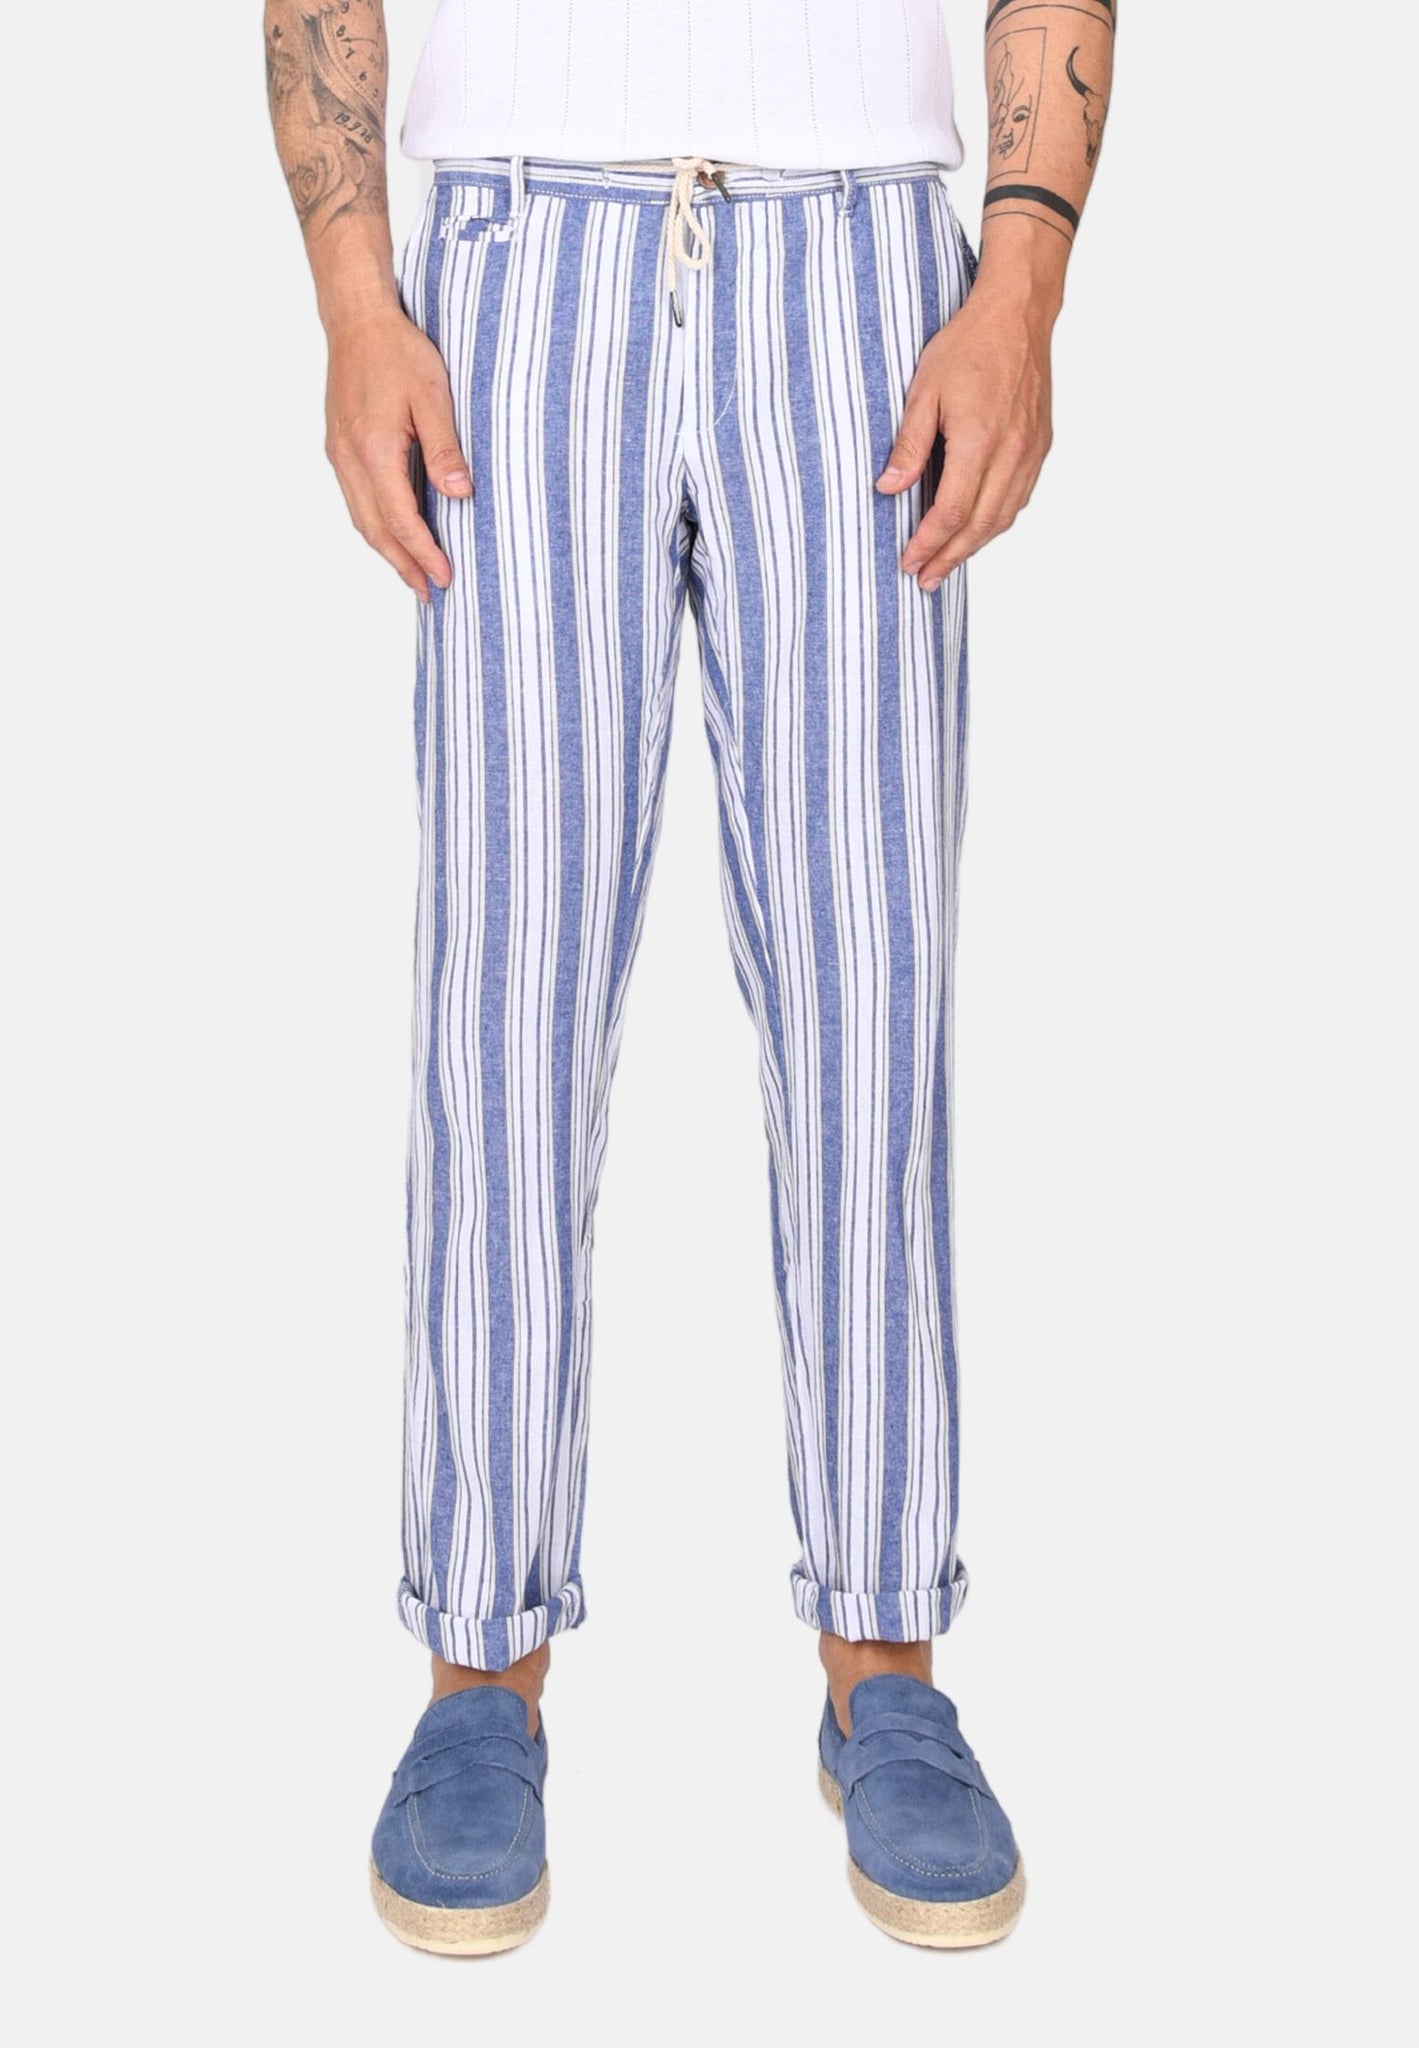 Men's Linen Trousers Casual Striped Summer Trousers